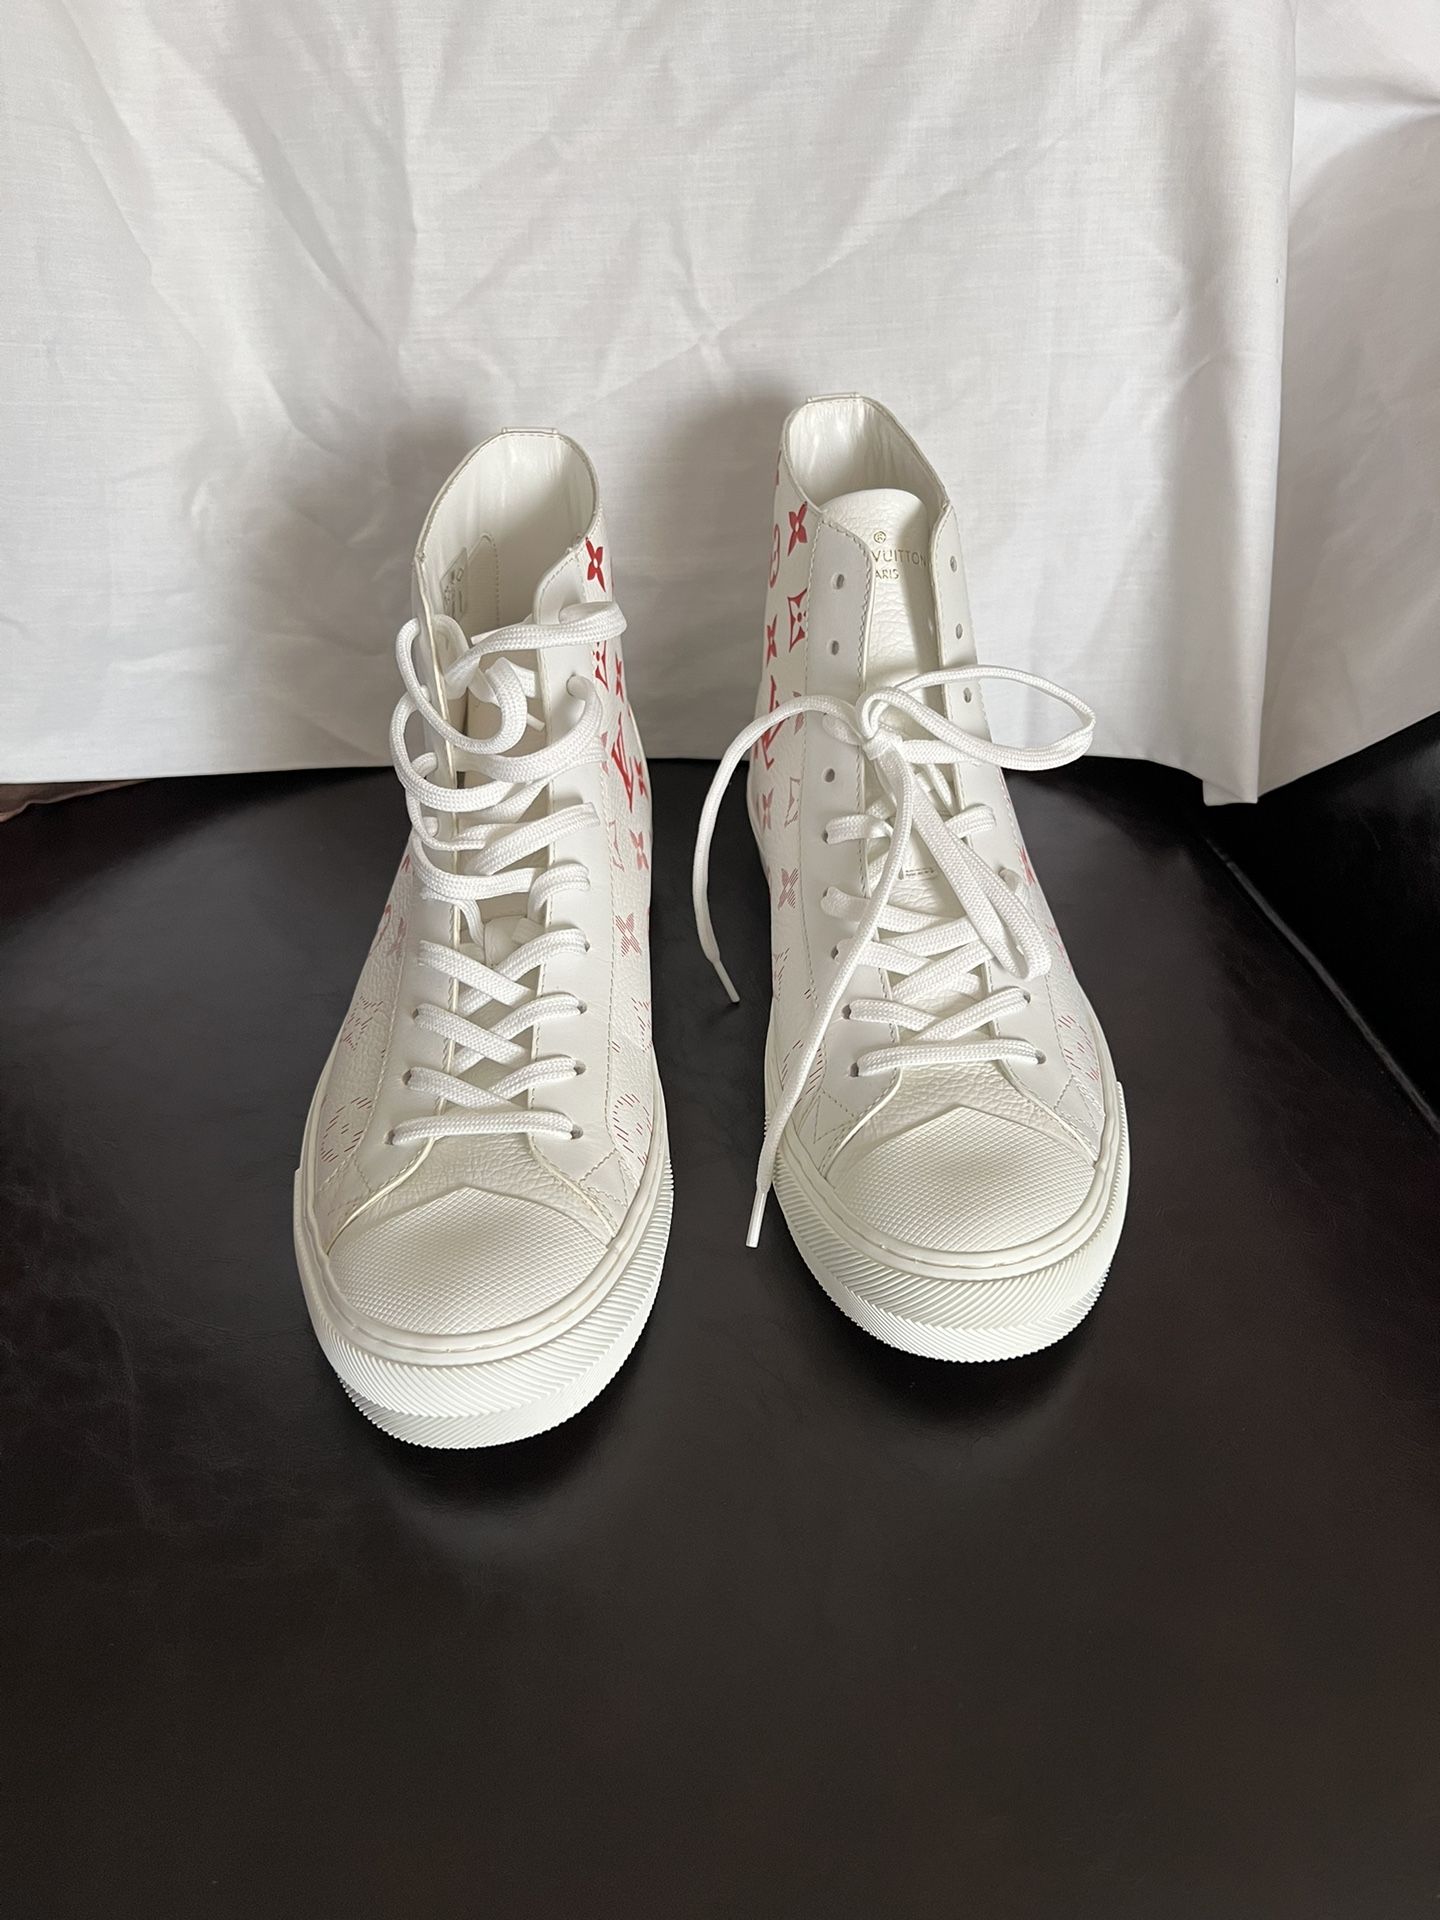 Louis Vuitton Tattoo Sneakers New 7 for Sale in Inglewood, CA